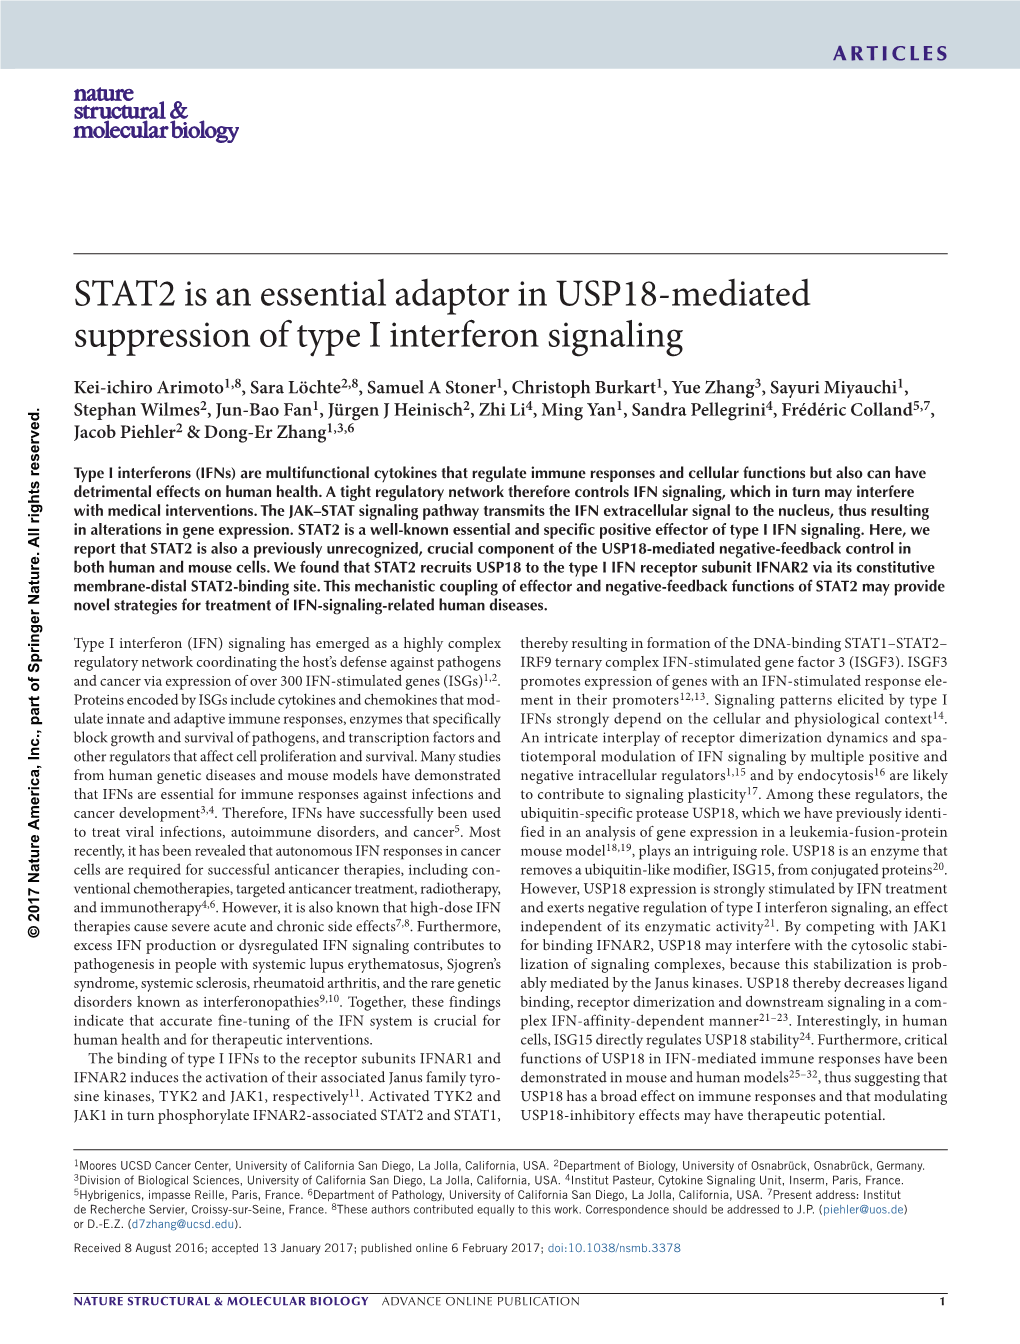 STAT2 Is an Essential Adaptor in USP18-Mediated Suppression of Type I Interferon Signaling